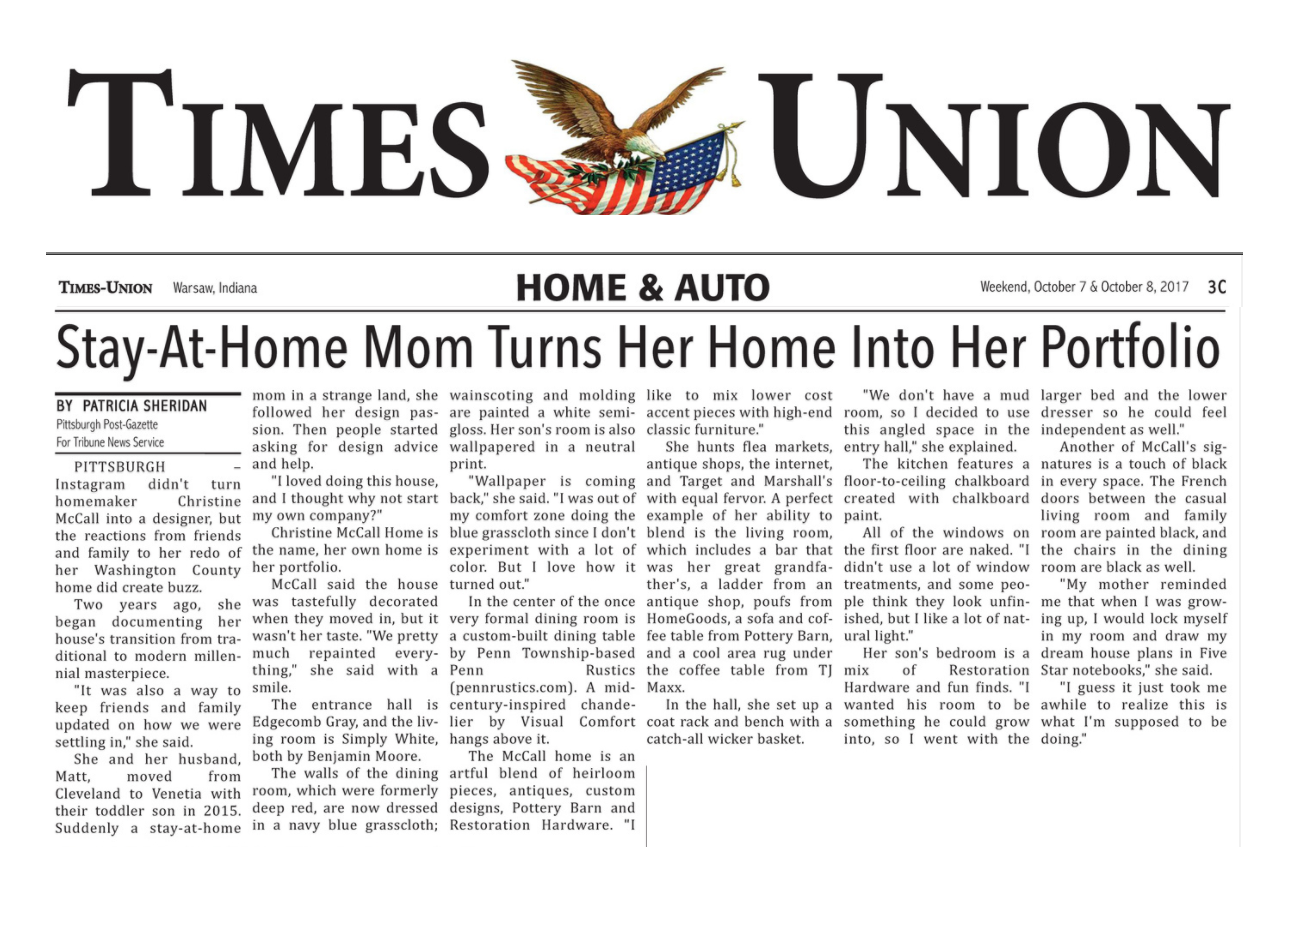 Times Union_2017_Stay-at-home mom turns her home into her porfolio.png